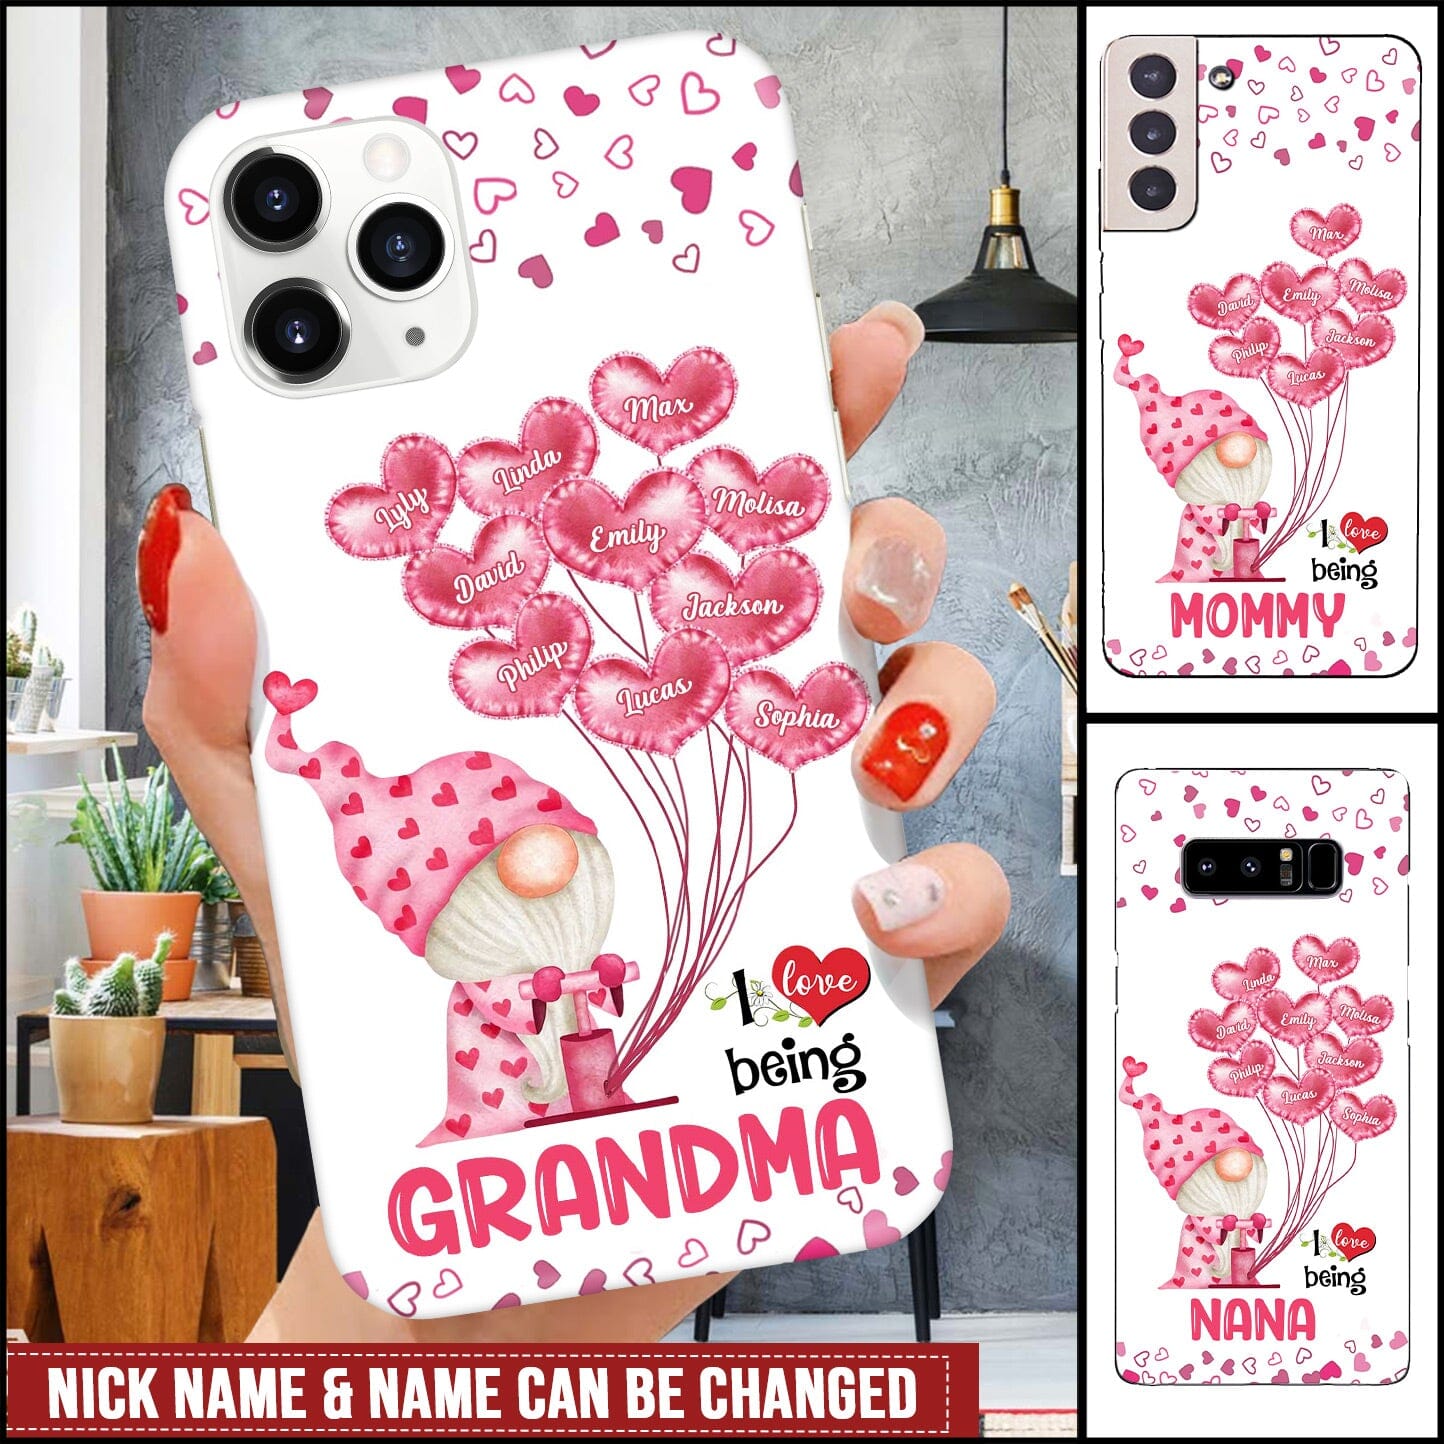 I love being Grandma Doll with pink balloon Personalized Phone case for Grandma Nana Mommy Auntie